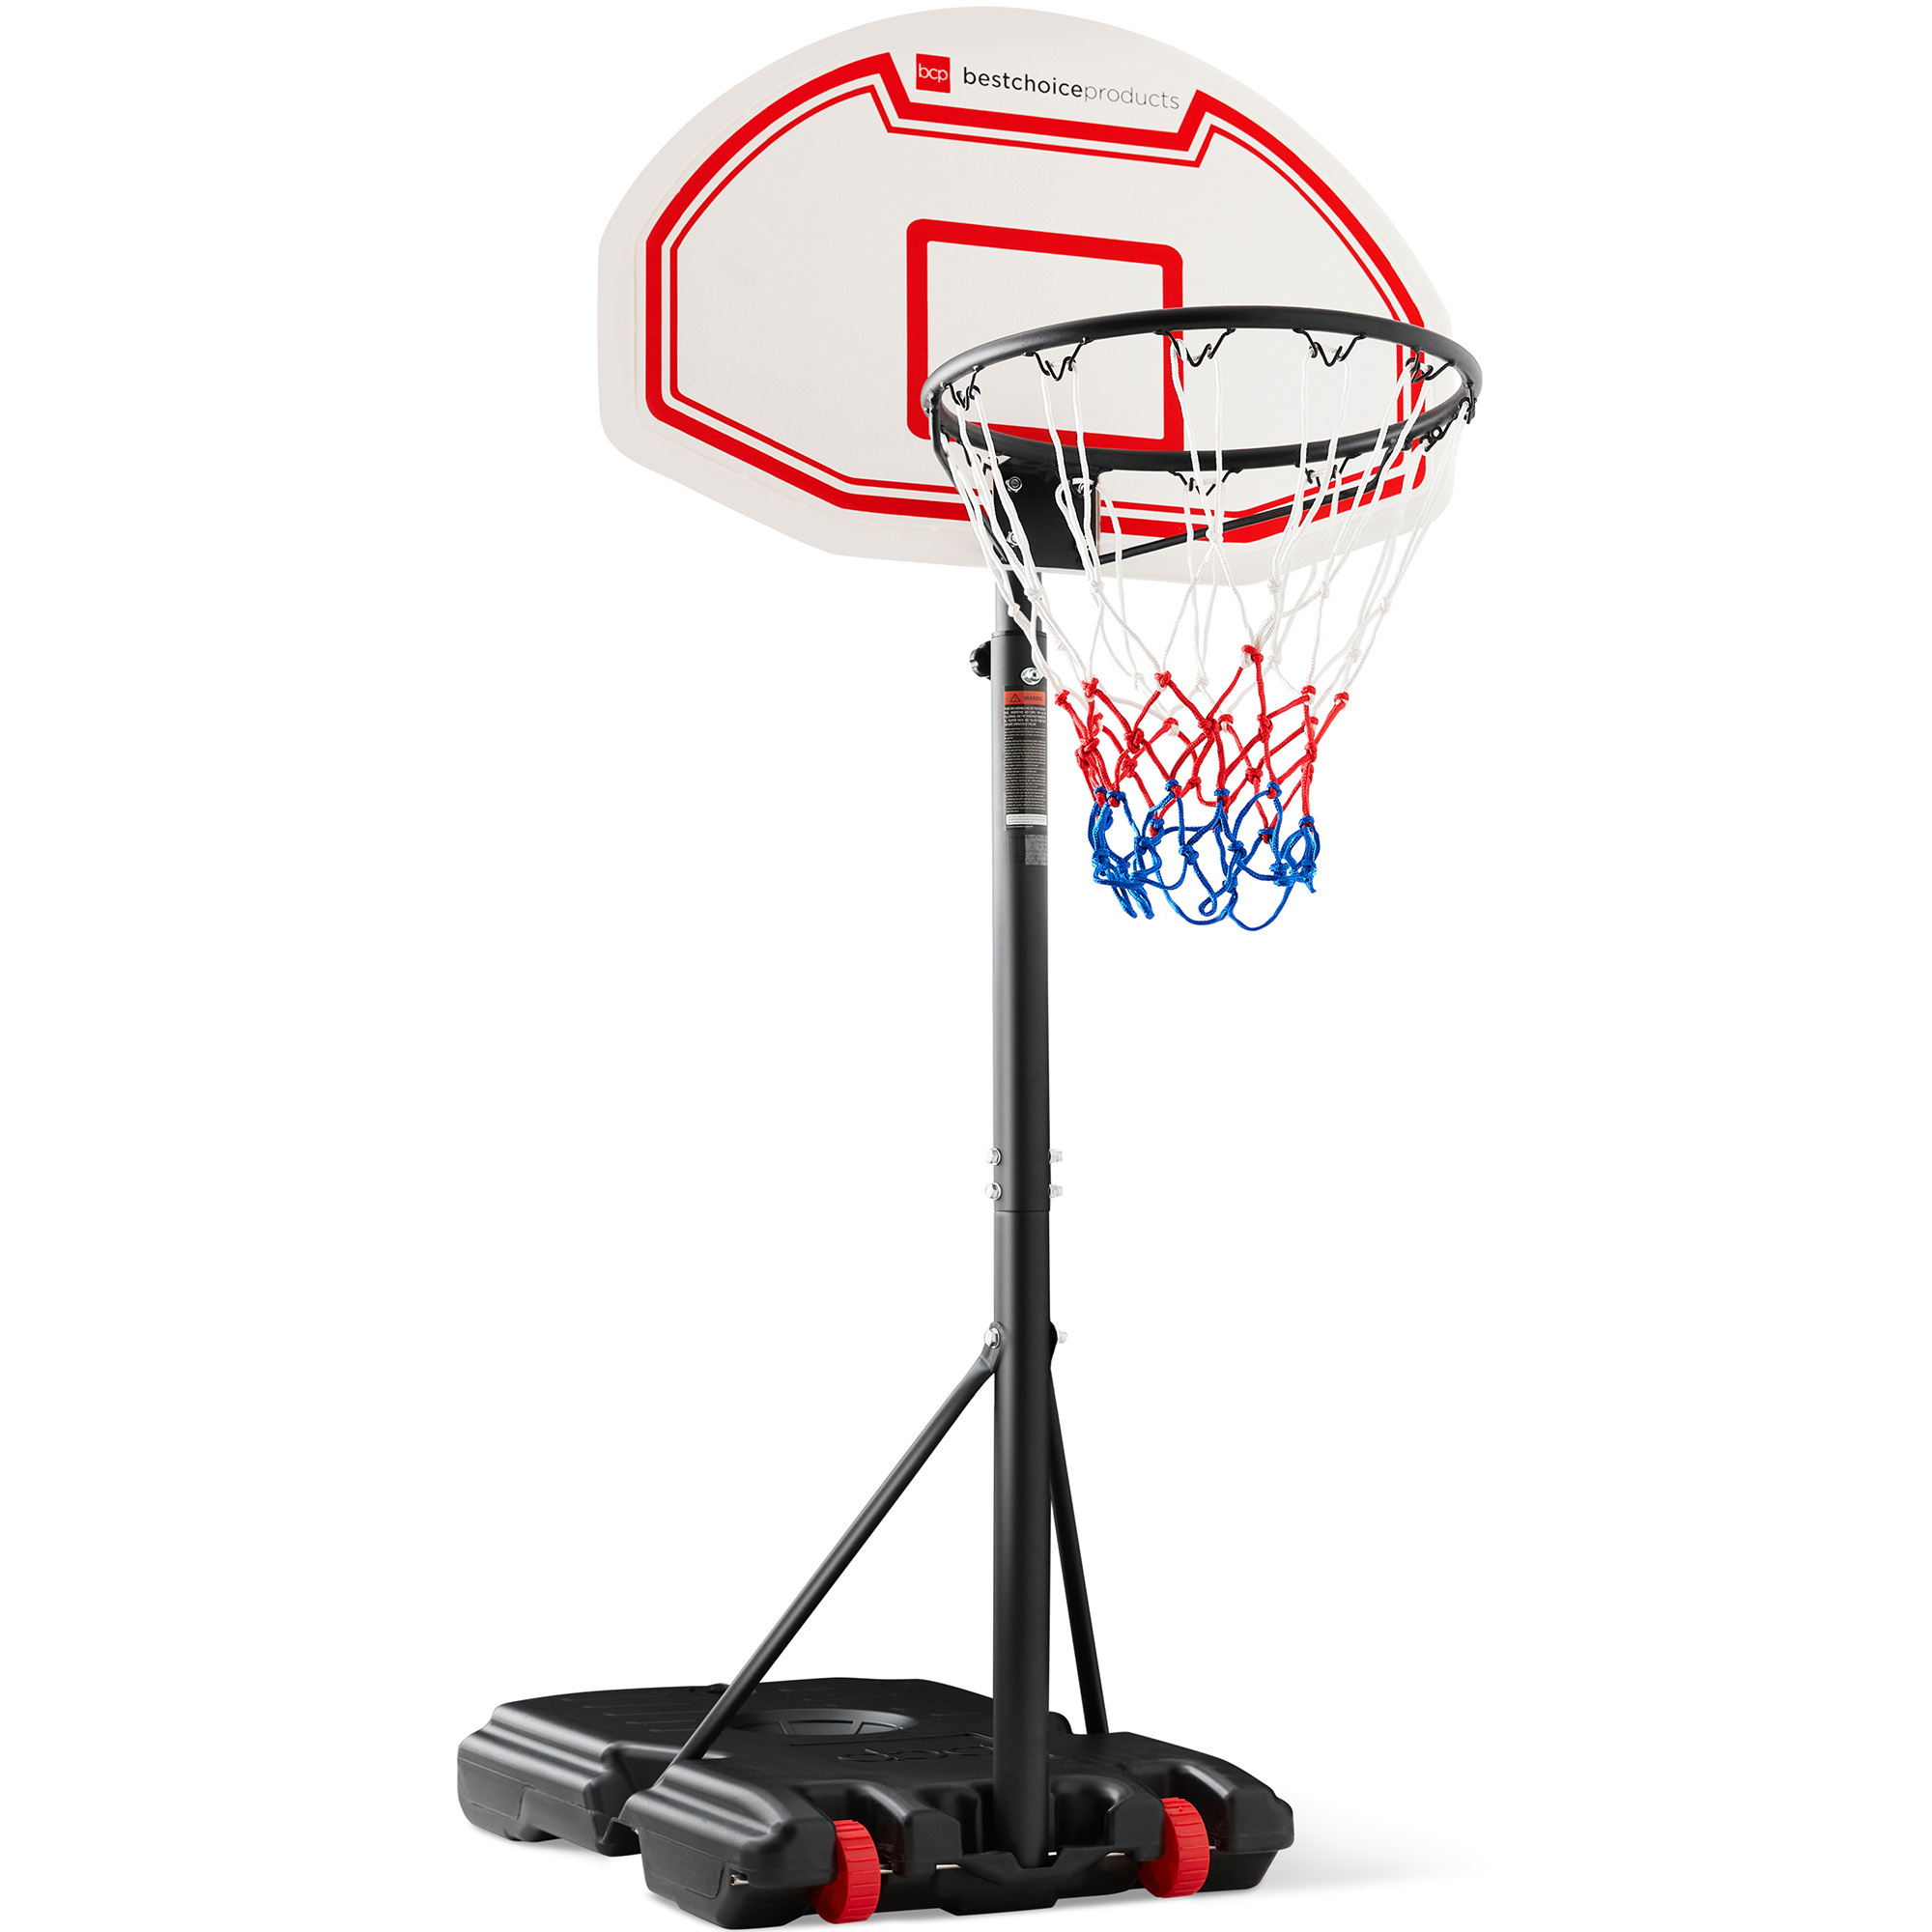 Best Choice Products Kids Height-Adjustable Basketball Hoop, Portable Backboard System w/ 2 Wheels - image 1 of 7